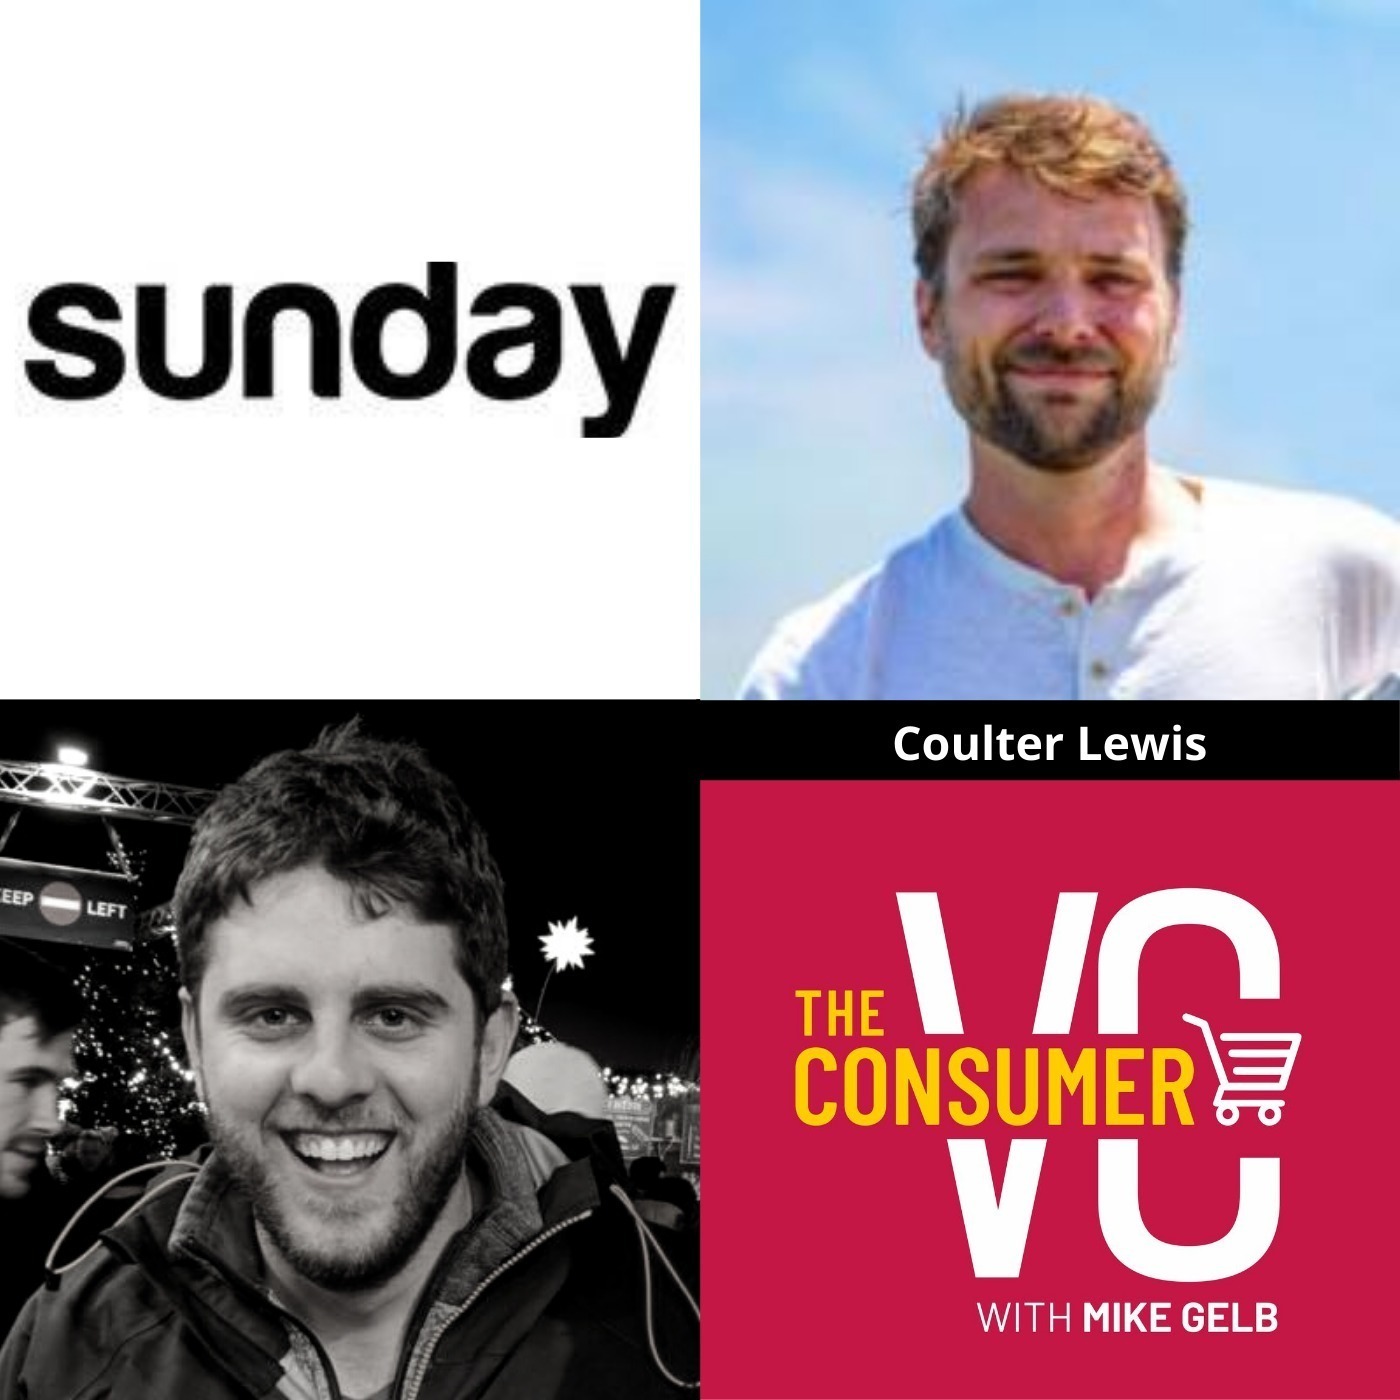 Coulter Lewis (Sunday) - Introducing D2C & Environmentally Friendly Lawn Care, and Lessons From a Serial Entrepreneur